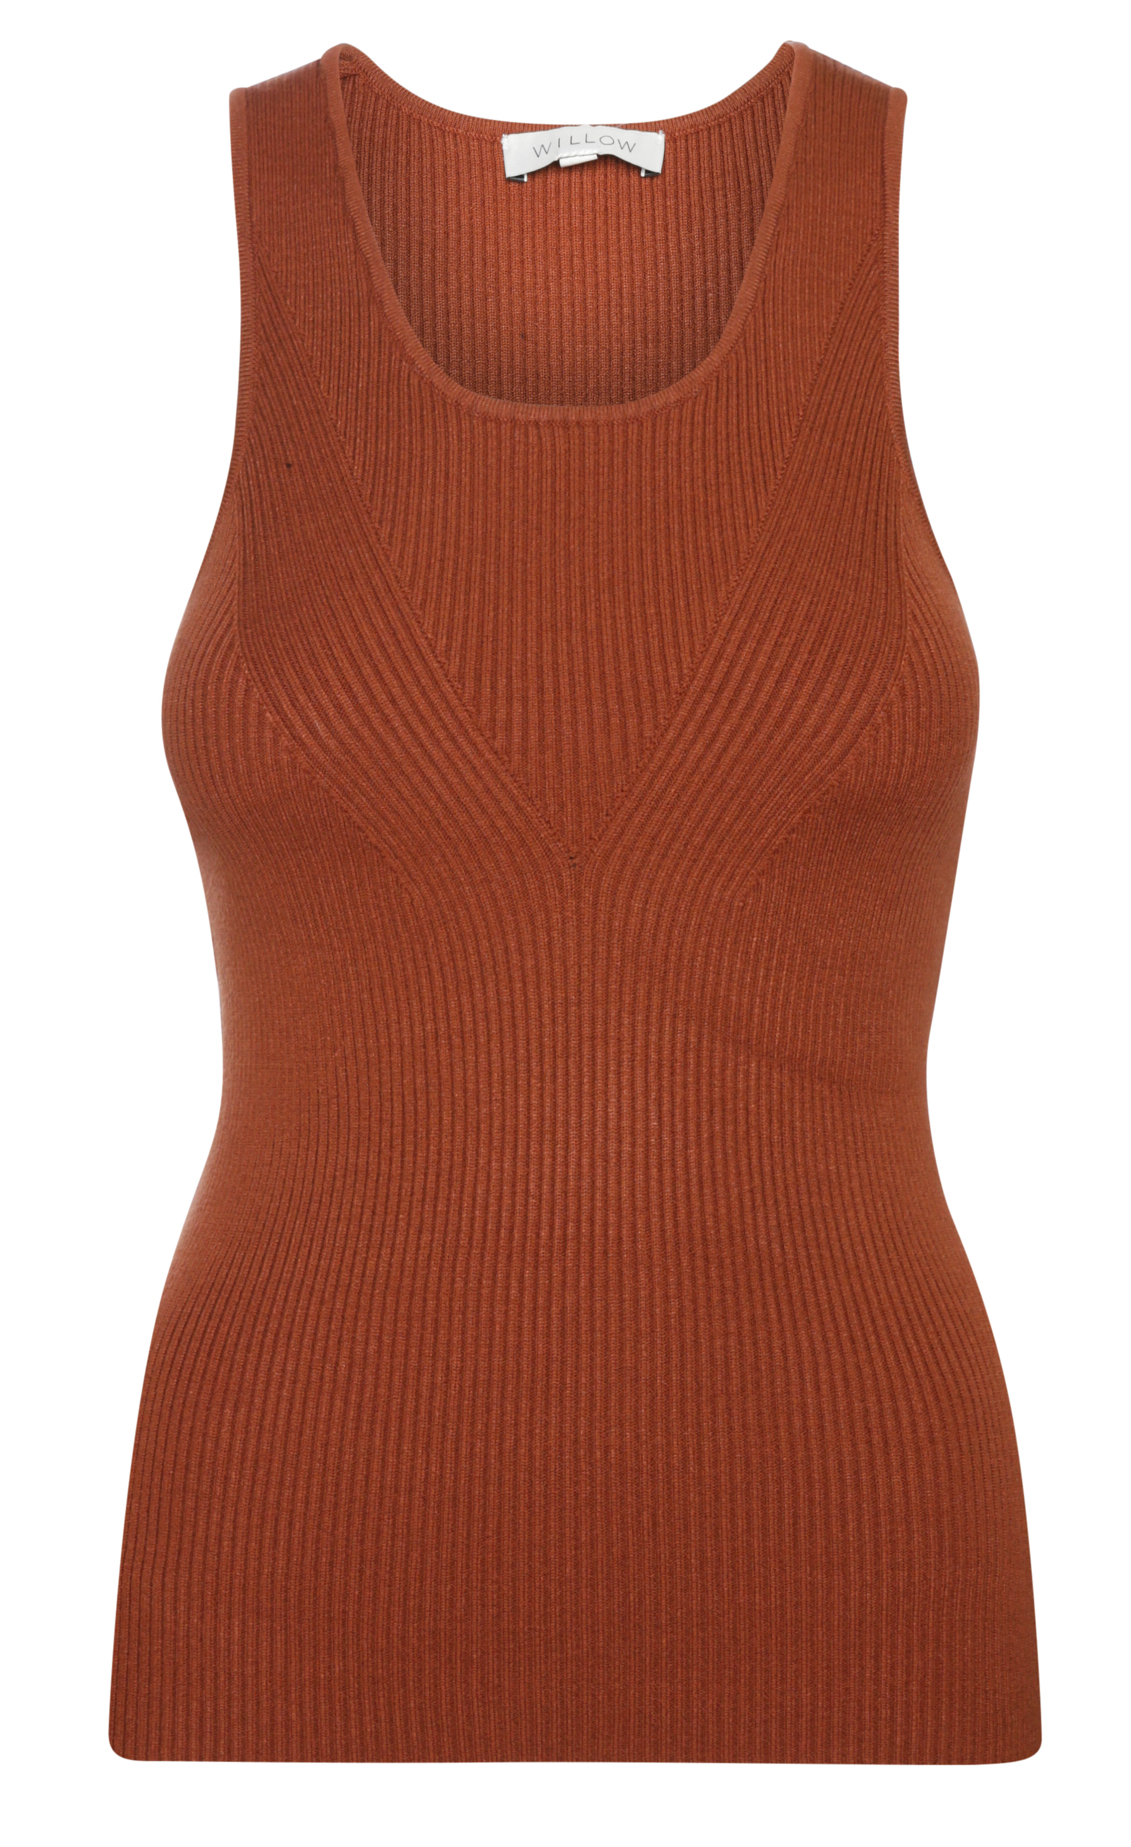 Willow Sleeveless Knit Top